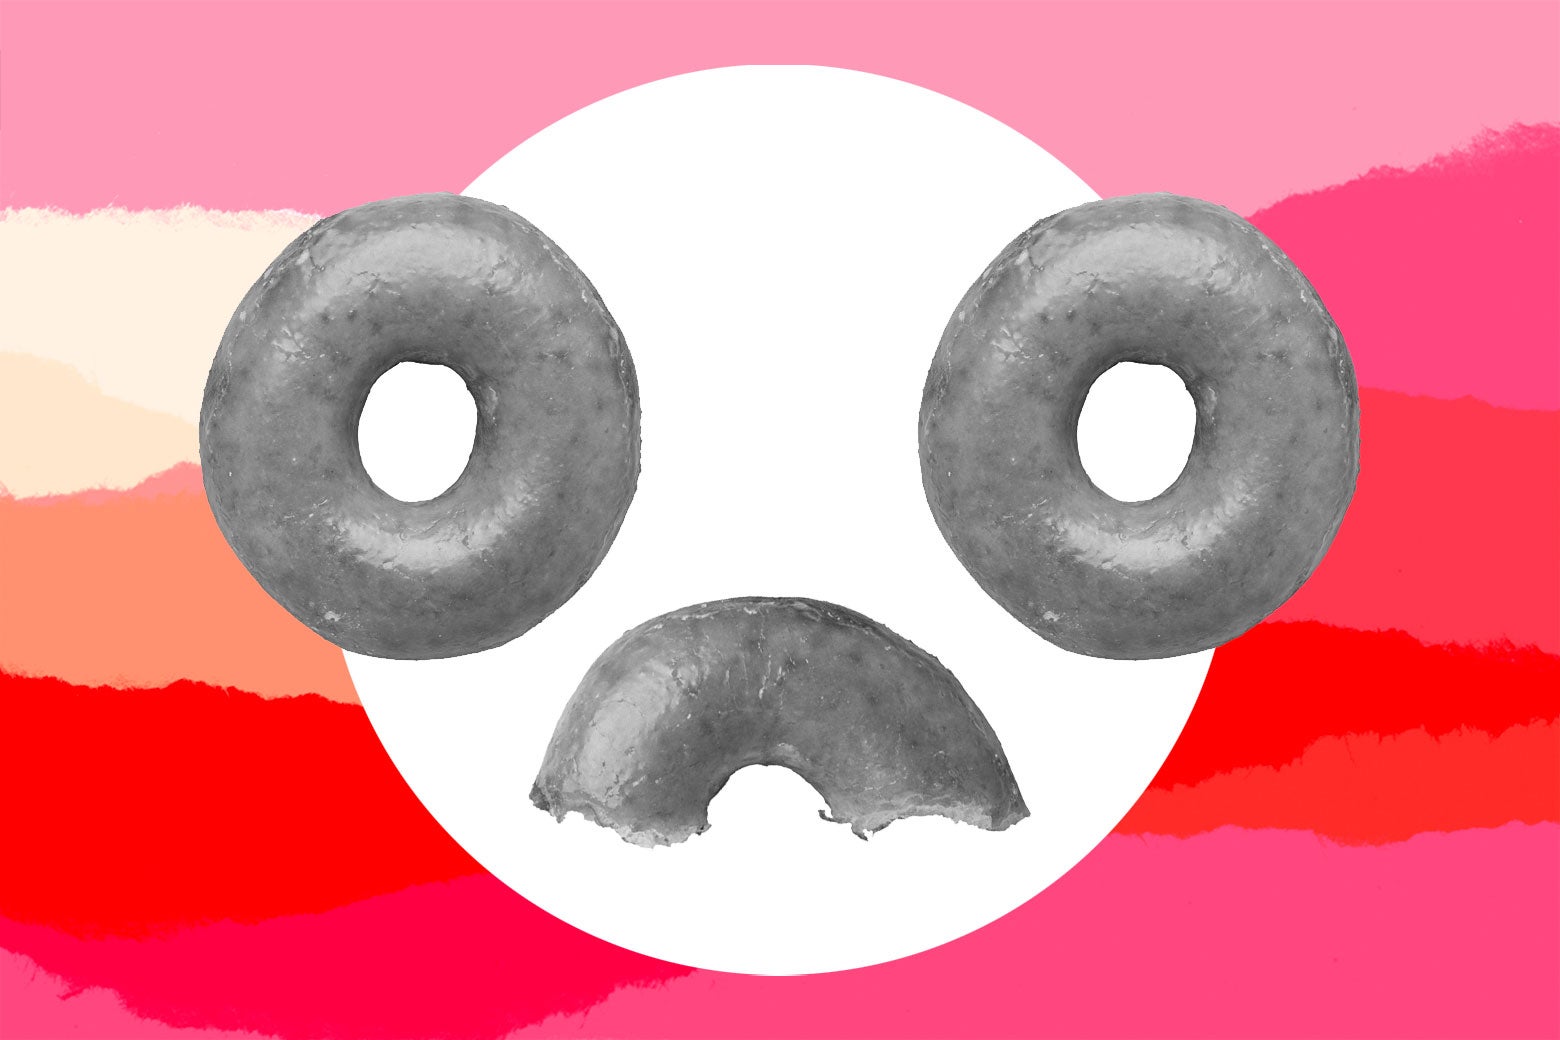 2 and 1/2 donuts, arranged in a frowning face shape.